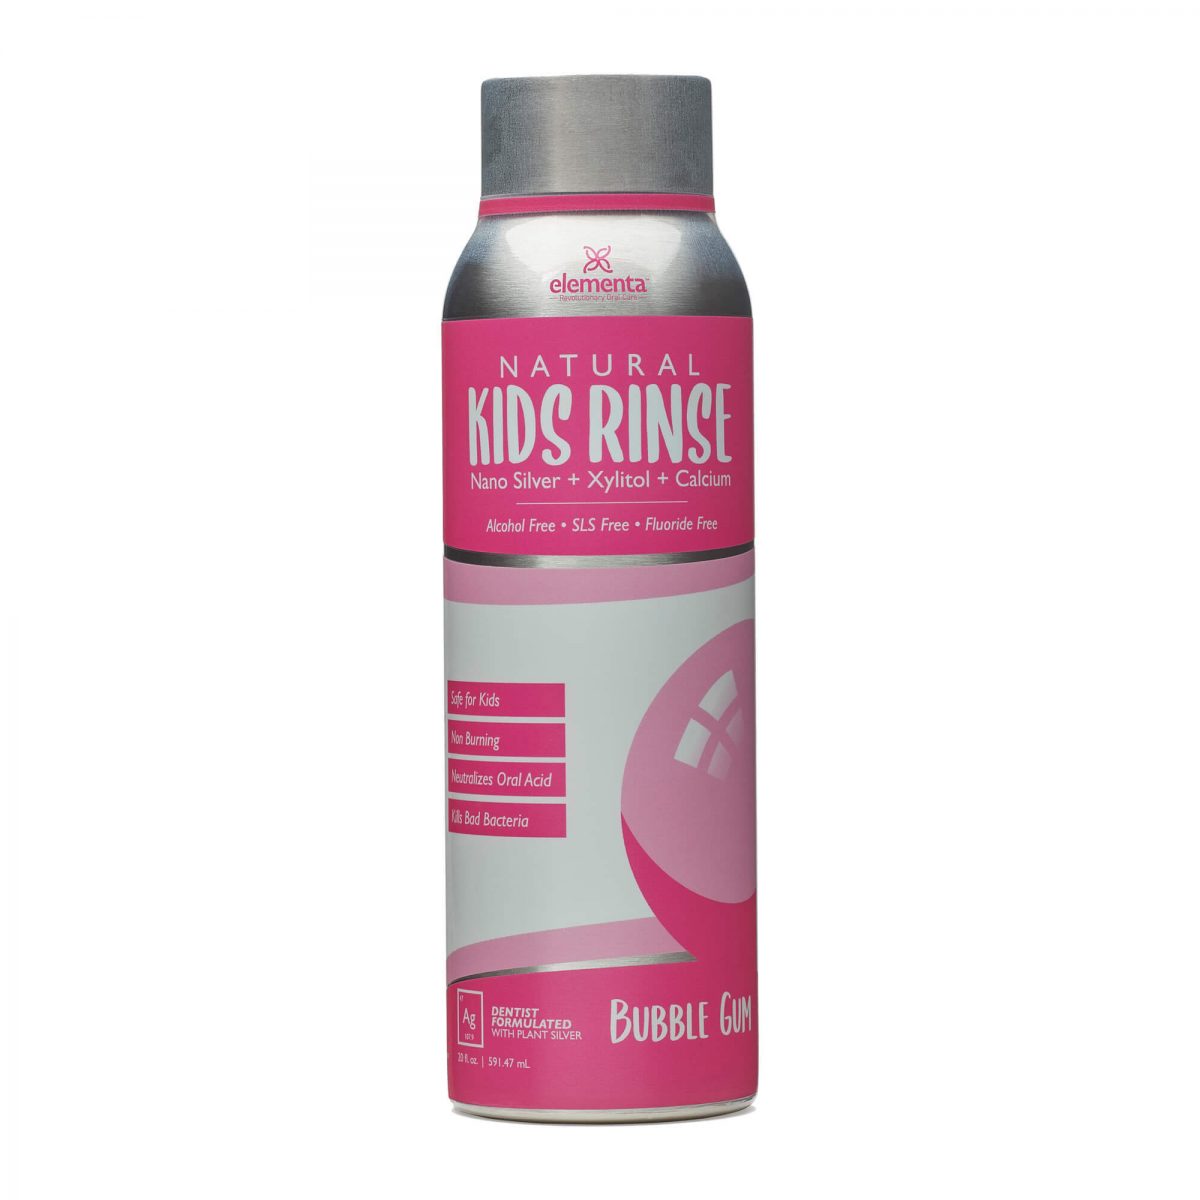 bottle of bubble gum flavored kids mouth rinse with nano silver